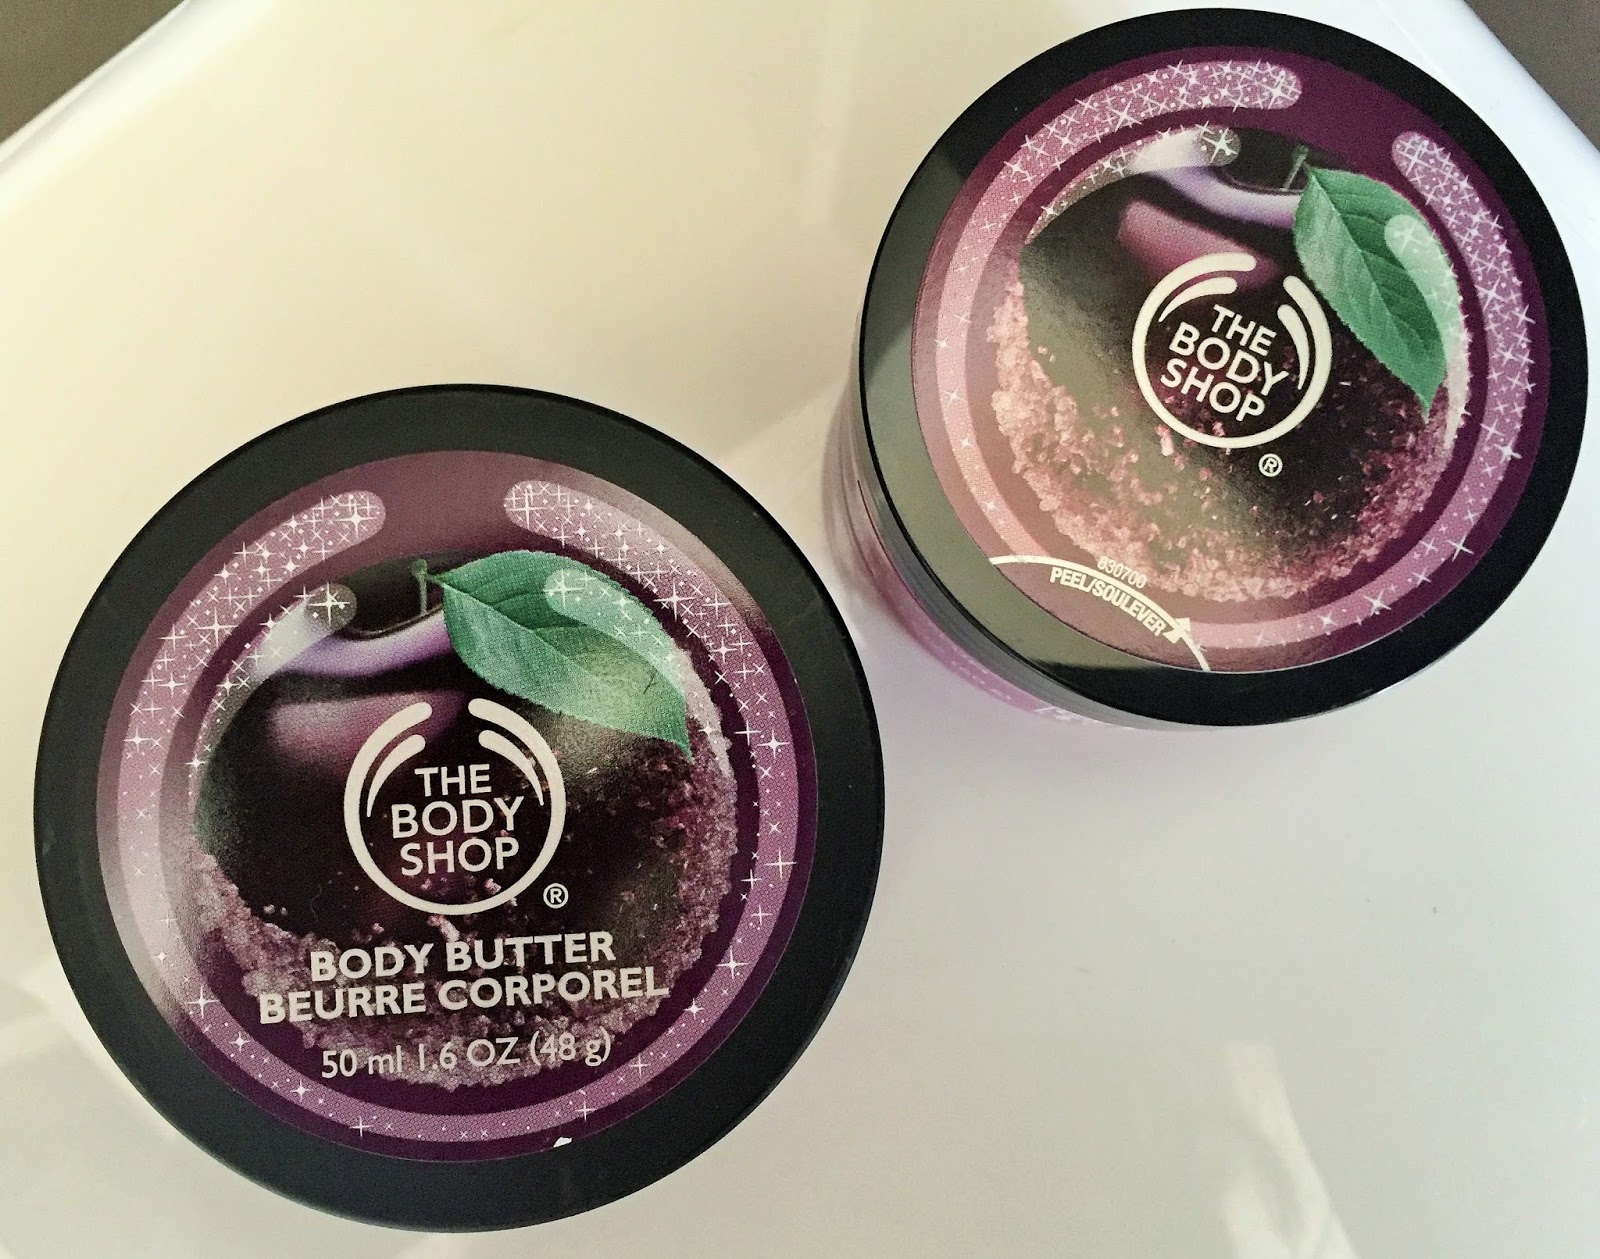 The Body Shop Christmas Gift Set Feel Good Tin in Frosted Plum body butter and sugar scrub